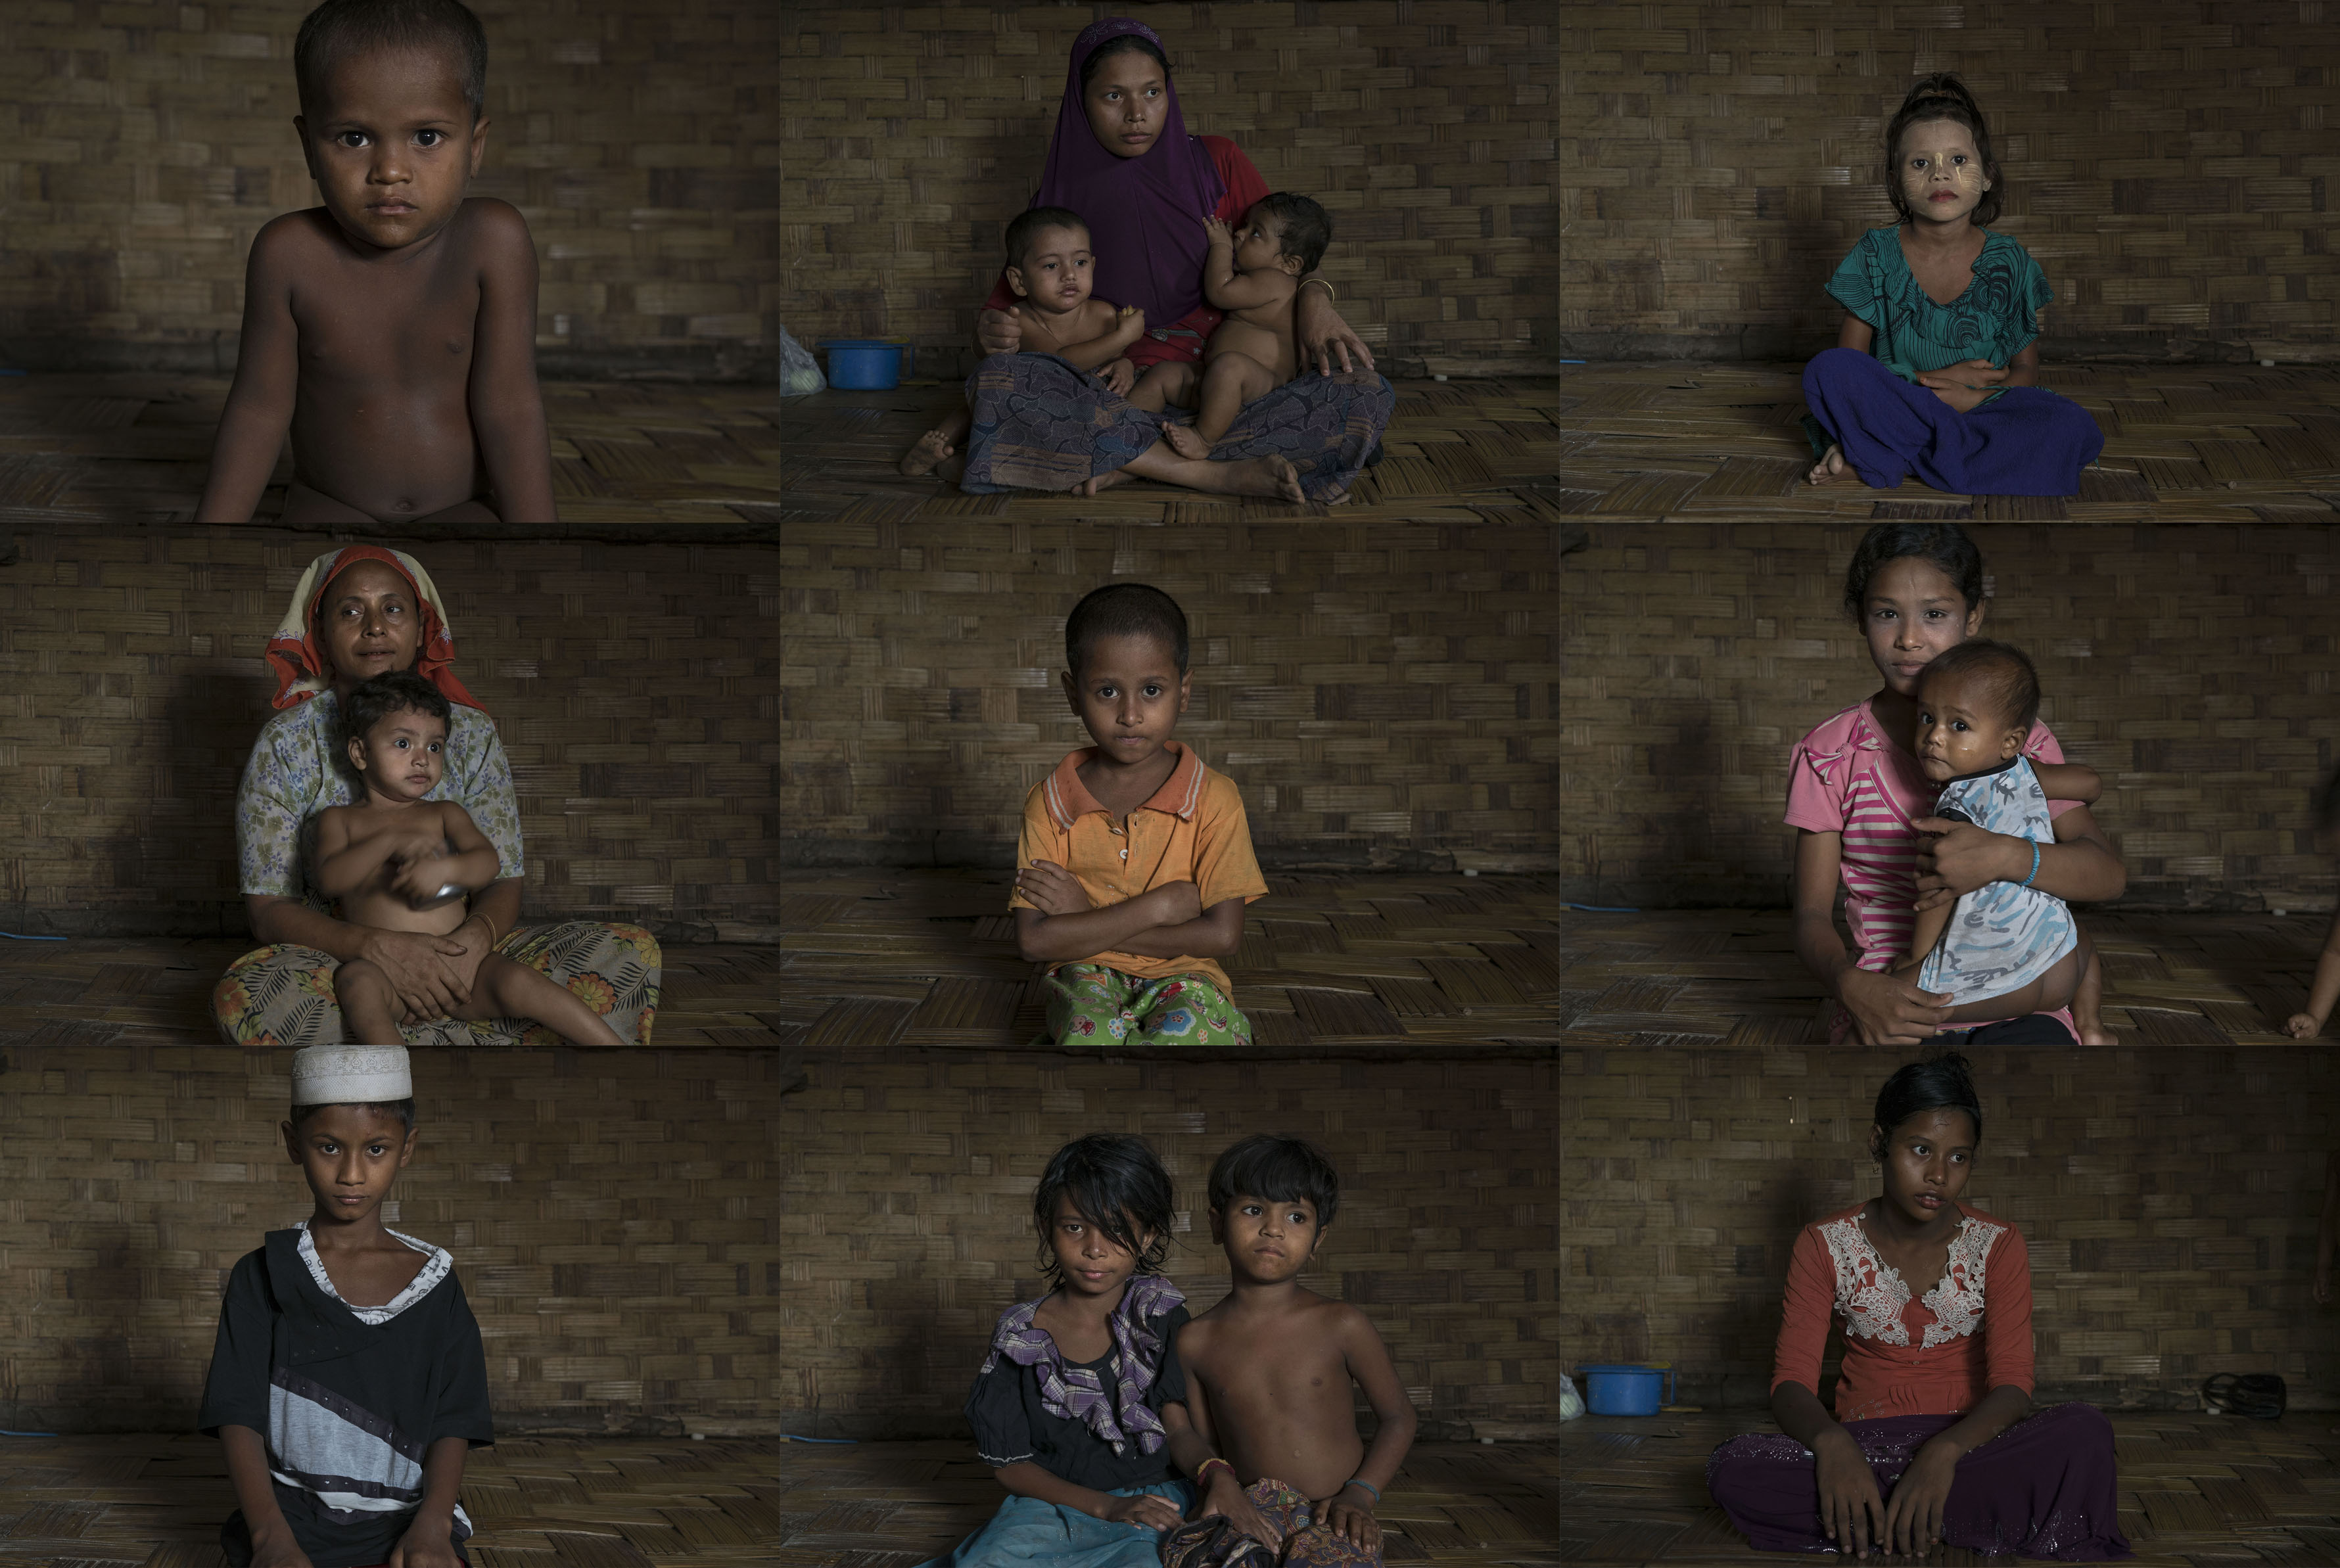 Rohingya people in the Internally Displaced Person (IDP) camps in Sittwe, Myanmar, June, 2016. An estimated 140,000 Rohingya are placed in the IDP camps guarded by the armed police and military.